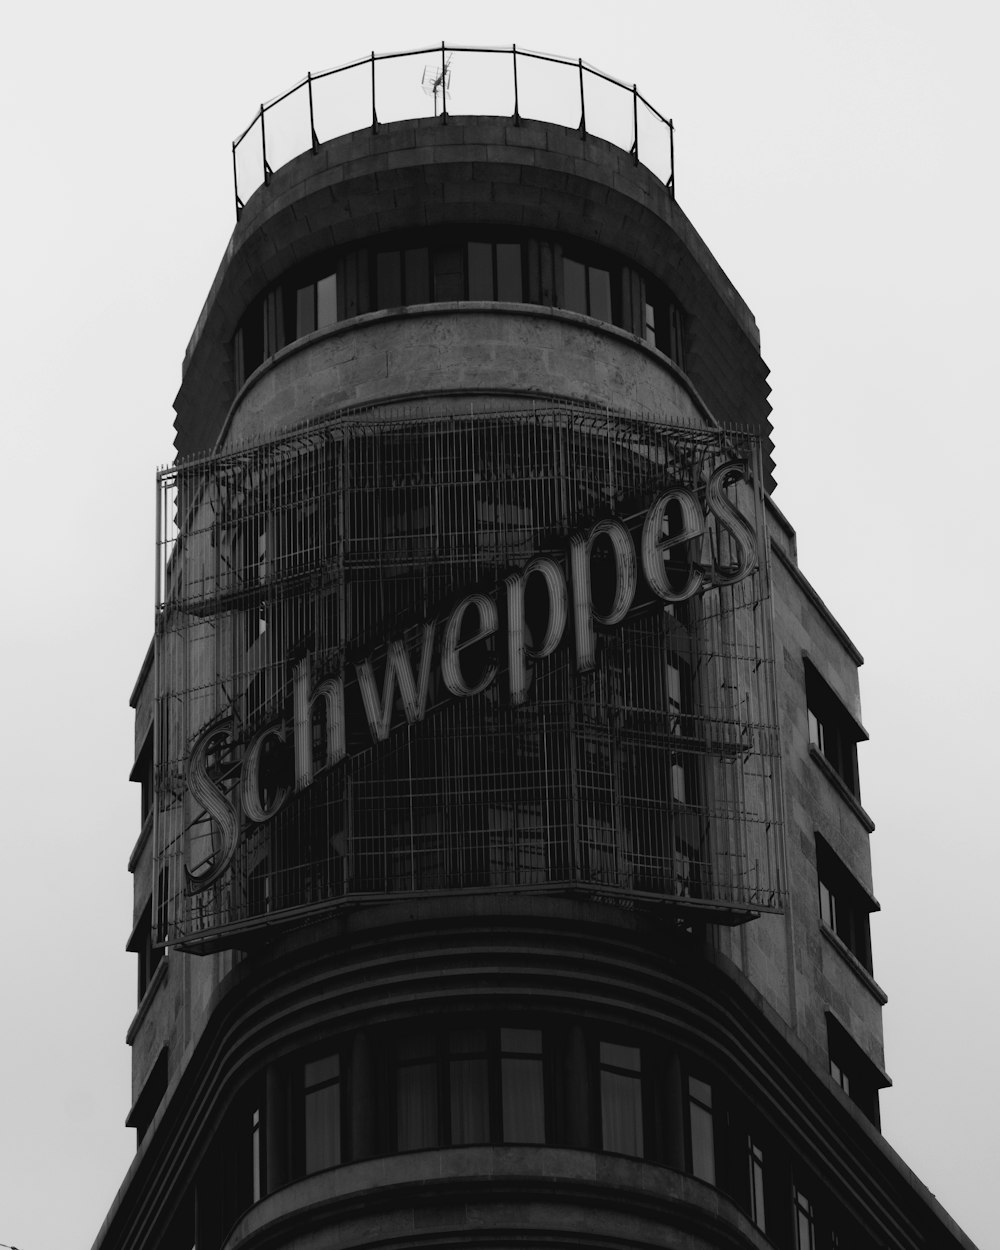 a black and white photo of a schweppes sign on a building